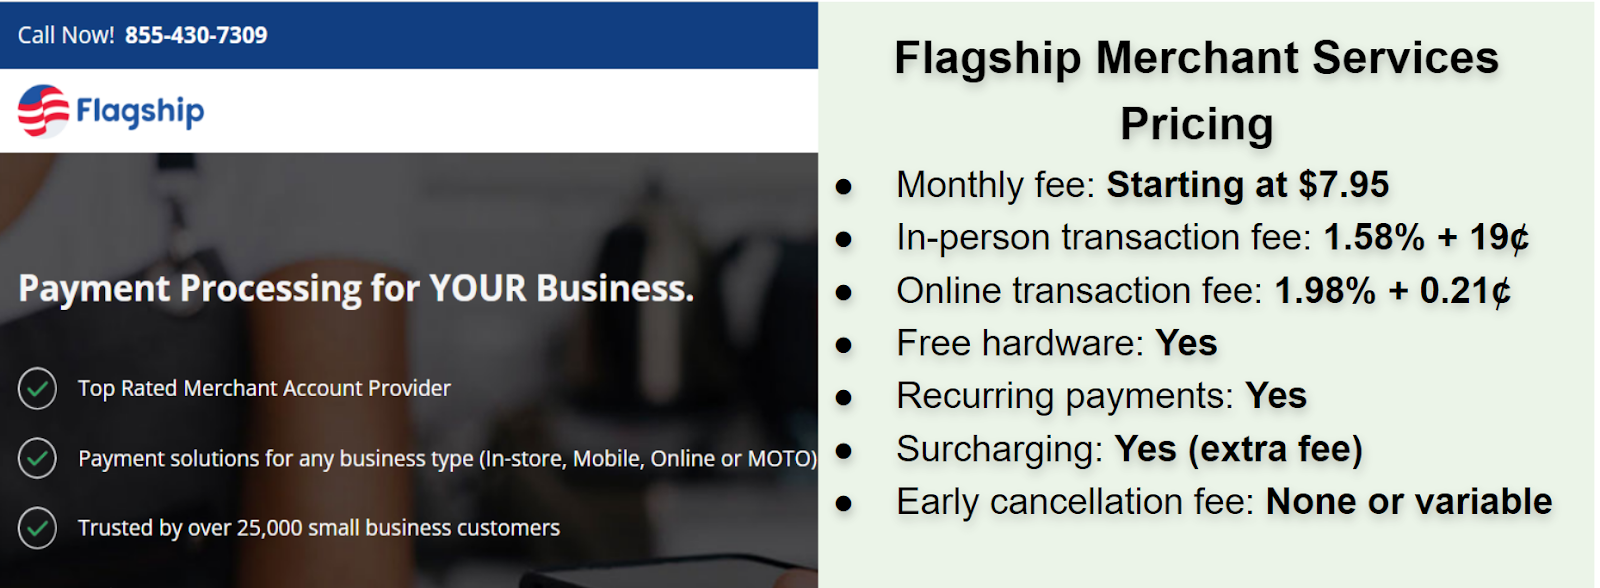 Flagship Merchant Services pricing info